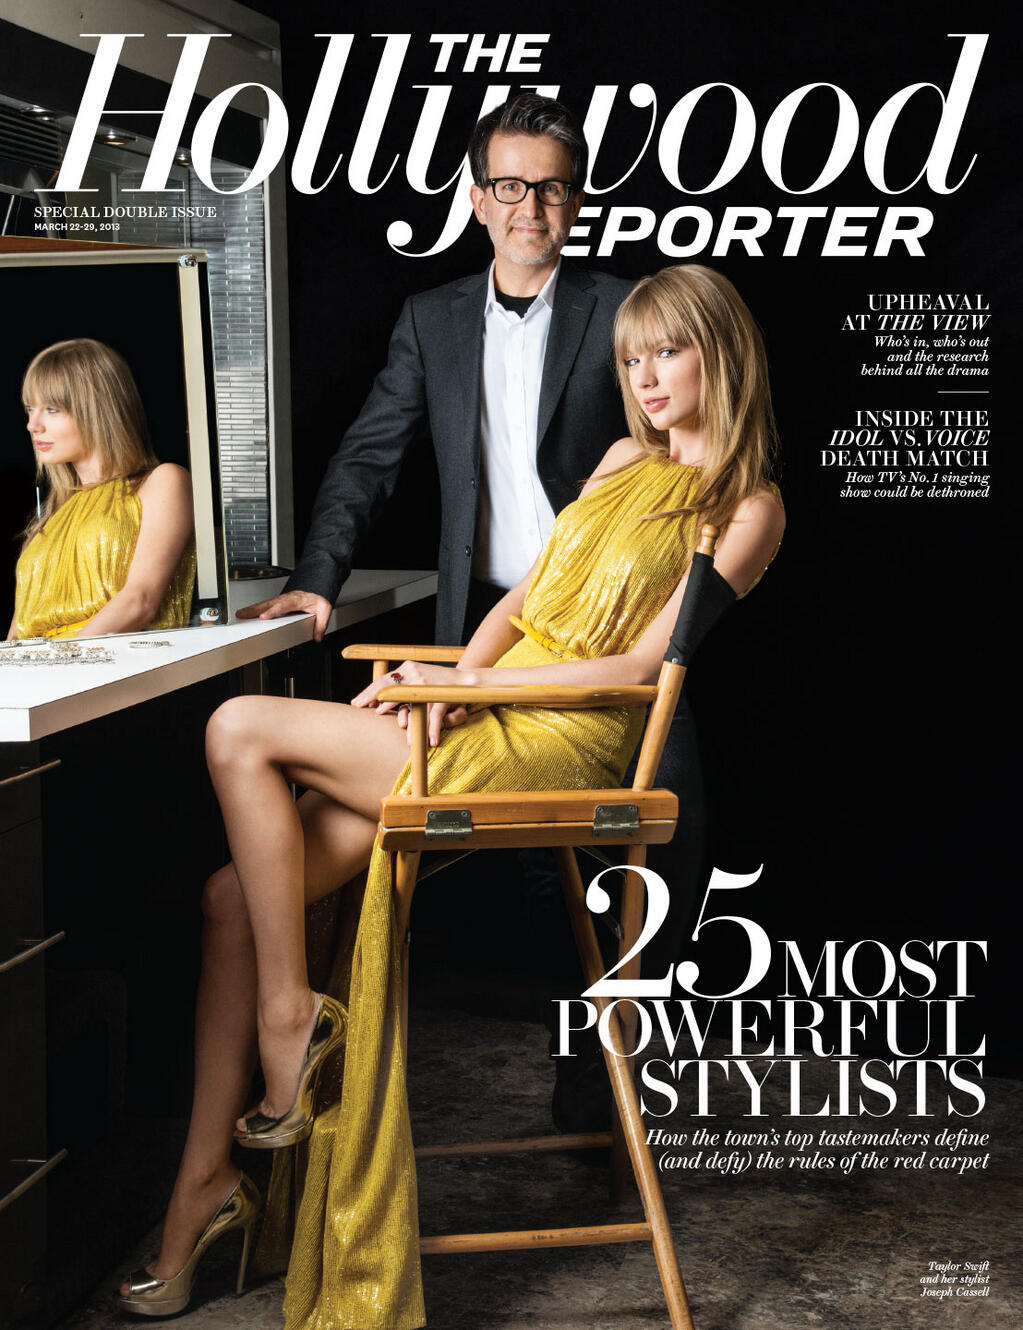 http://www.taylorpictures.net/albums/scans/2013/thehollywoodreporter/001.jpg